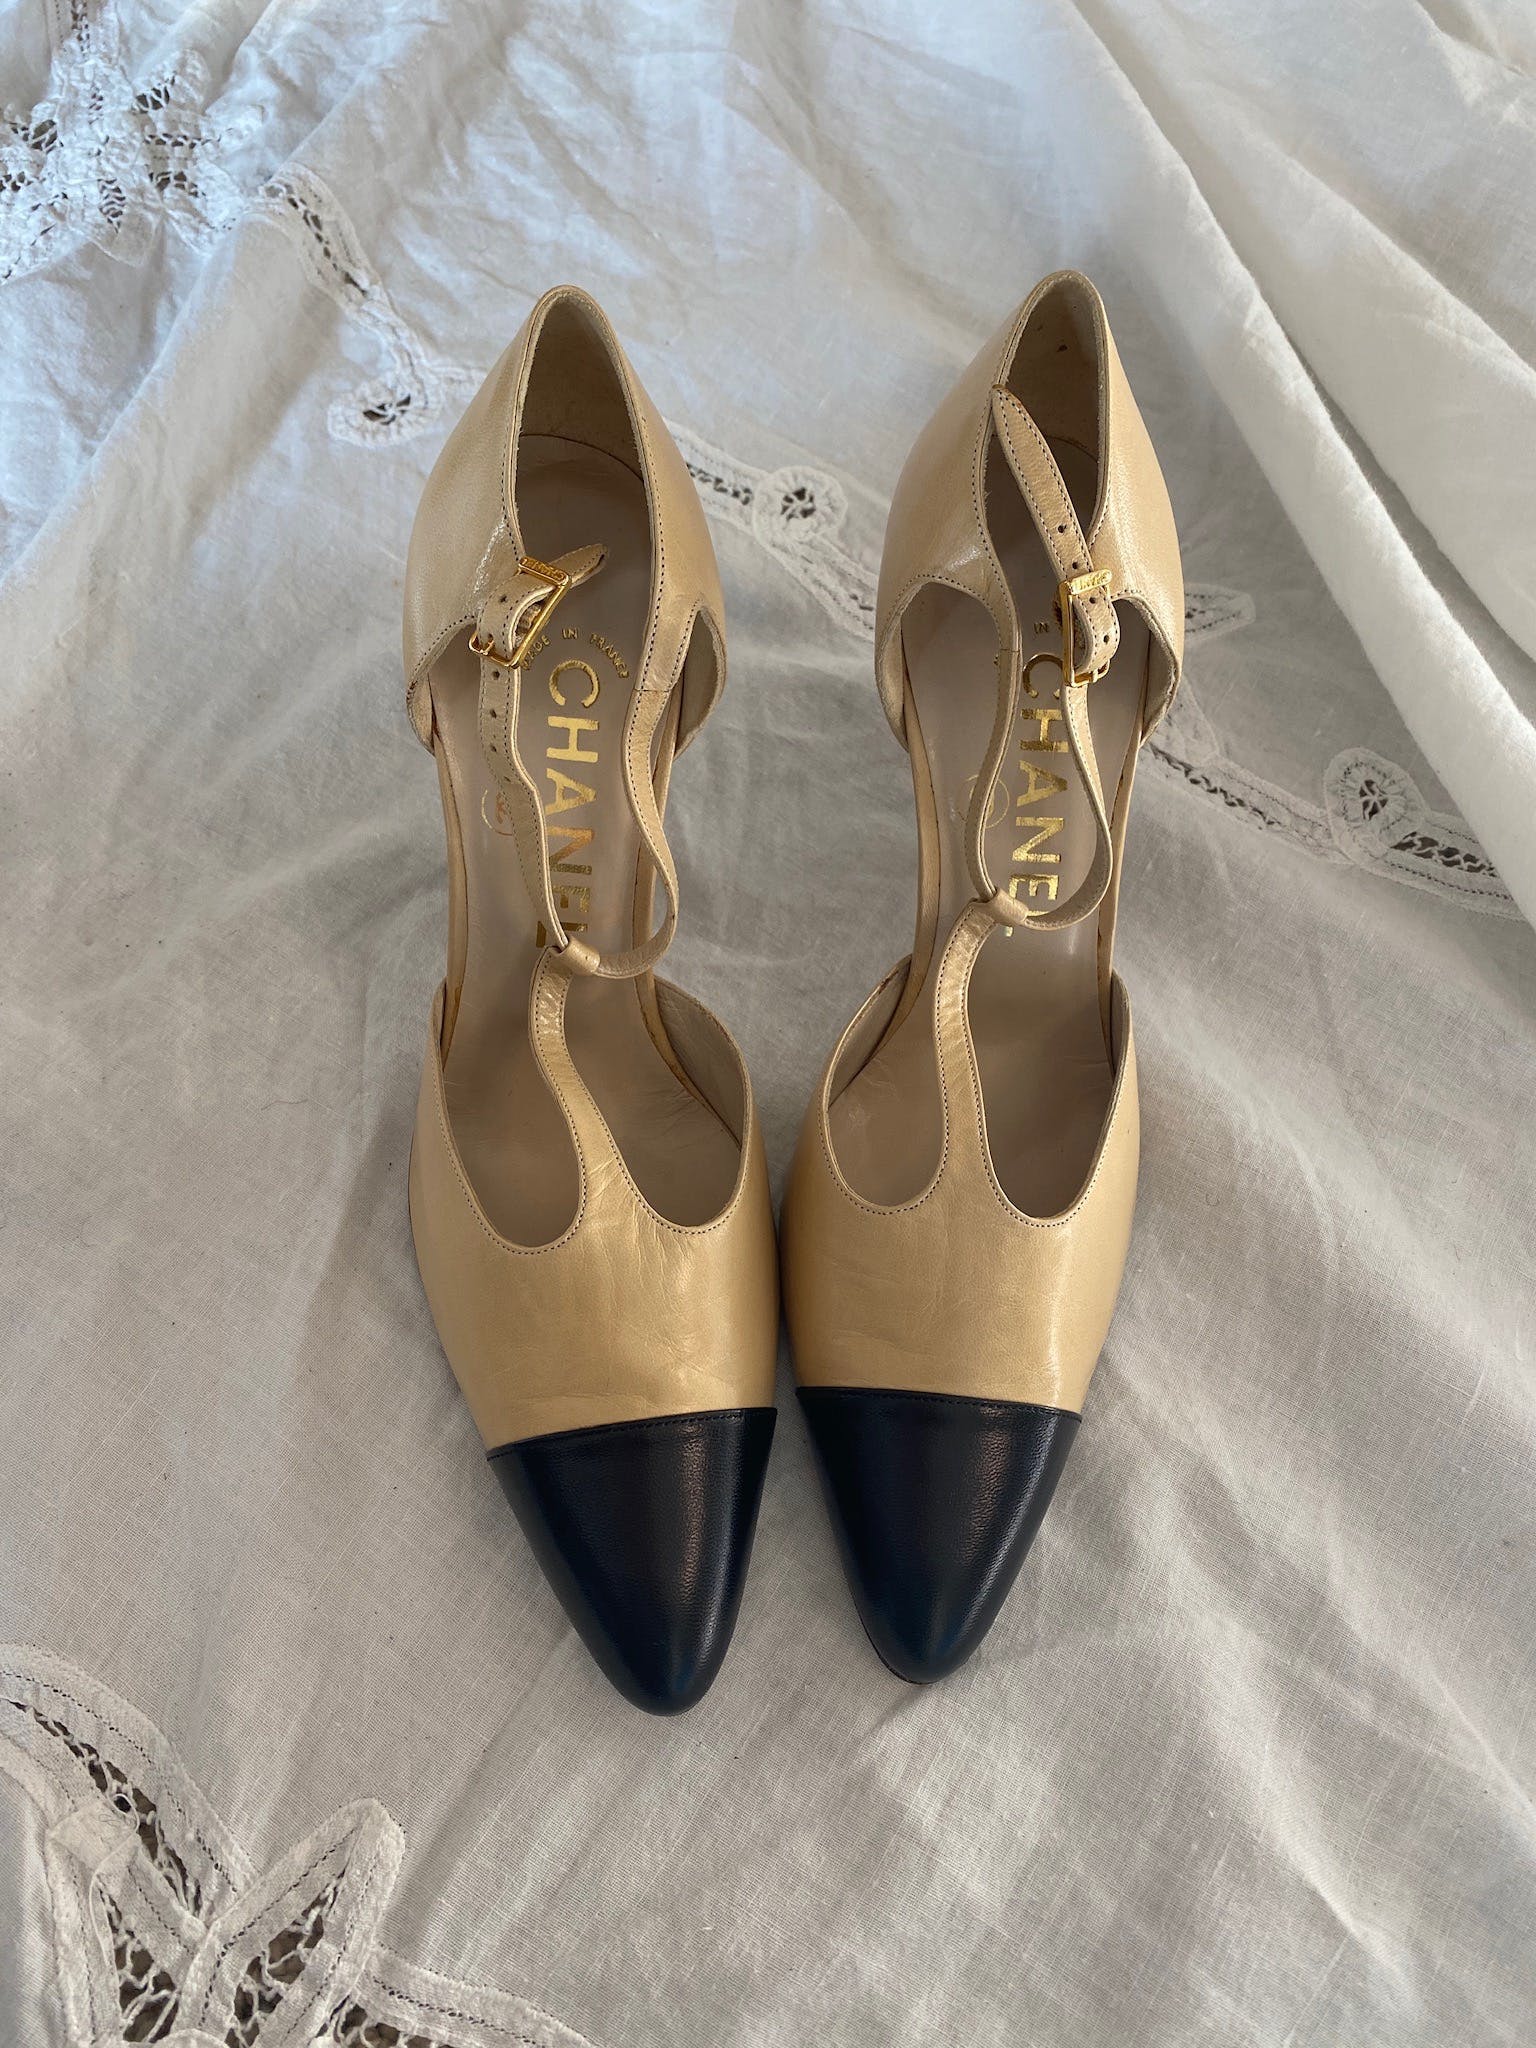 Vintage 90's T-Strap Two Tone Mary Jane Pumps by Chanel